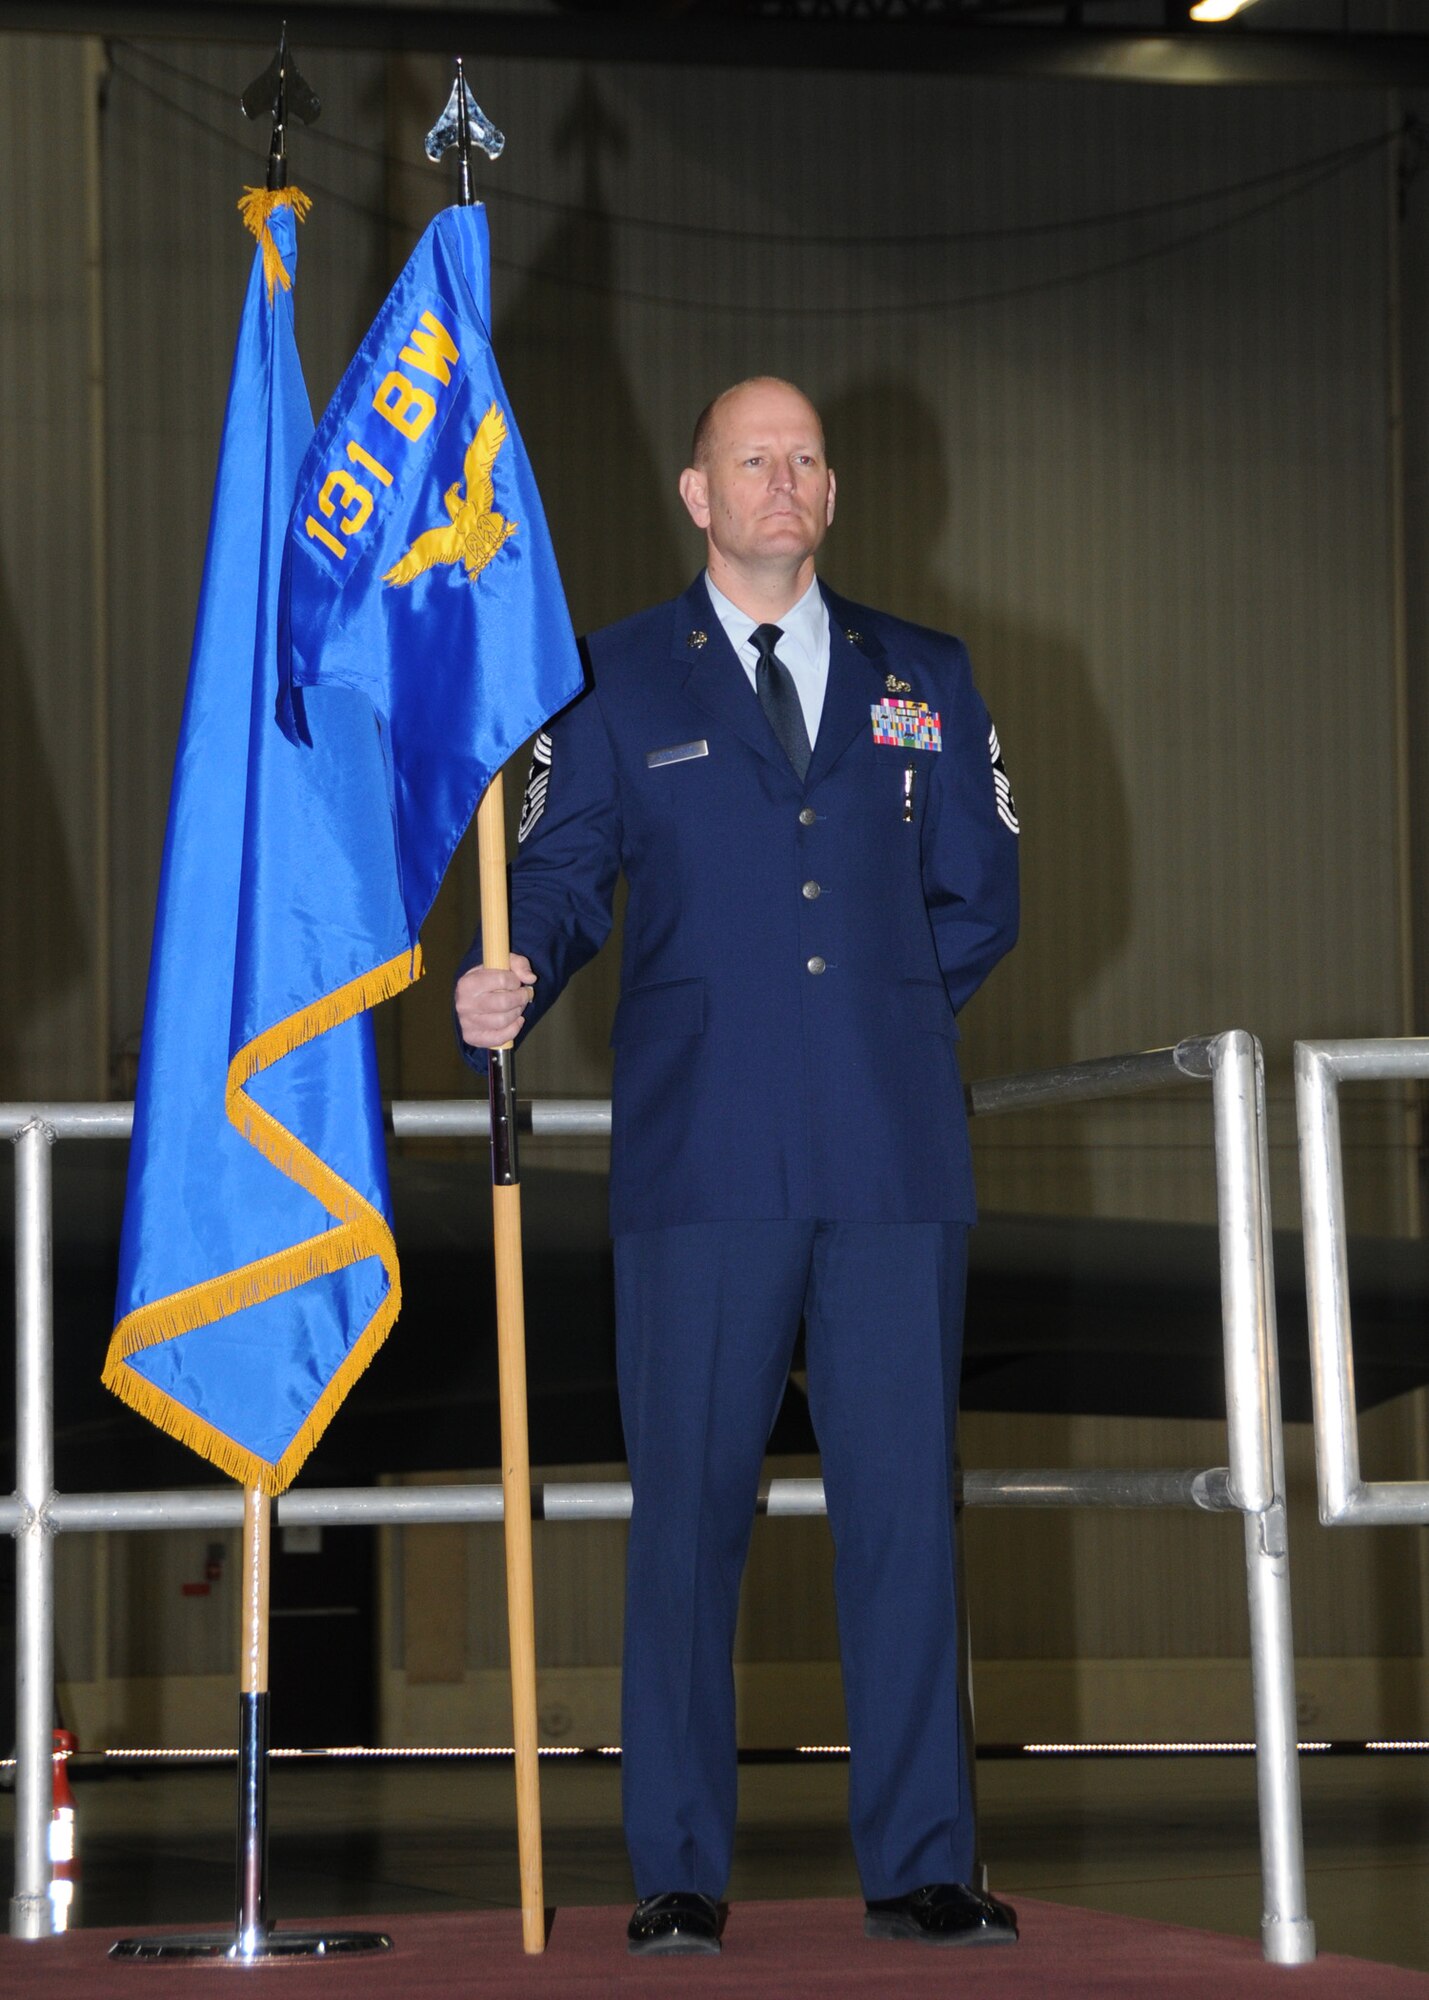 131st Bomb Wing Command Chief Master Sgt. Richard Pingleton, stands ready to pass the guidon during Col. Gregory Champagne's assumption of command ceremony at Whiteman AFB, March 20.  (U.S. Air Force photo by Master Sgt. Mary-Dale Amison  RELEASED)